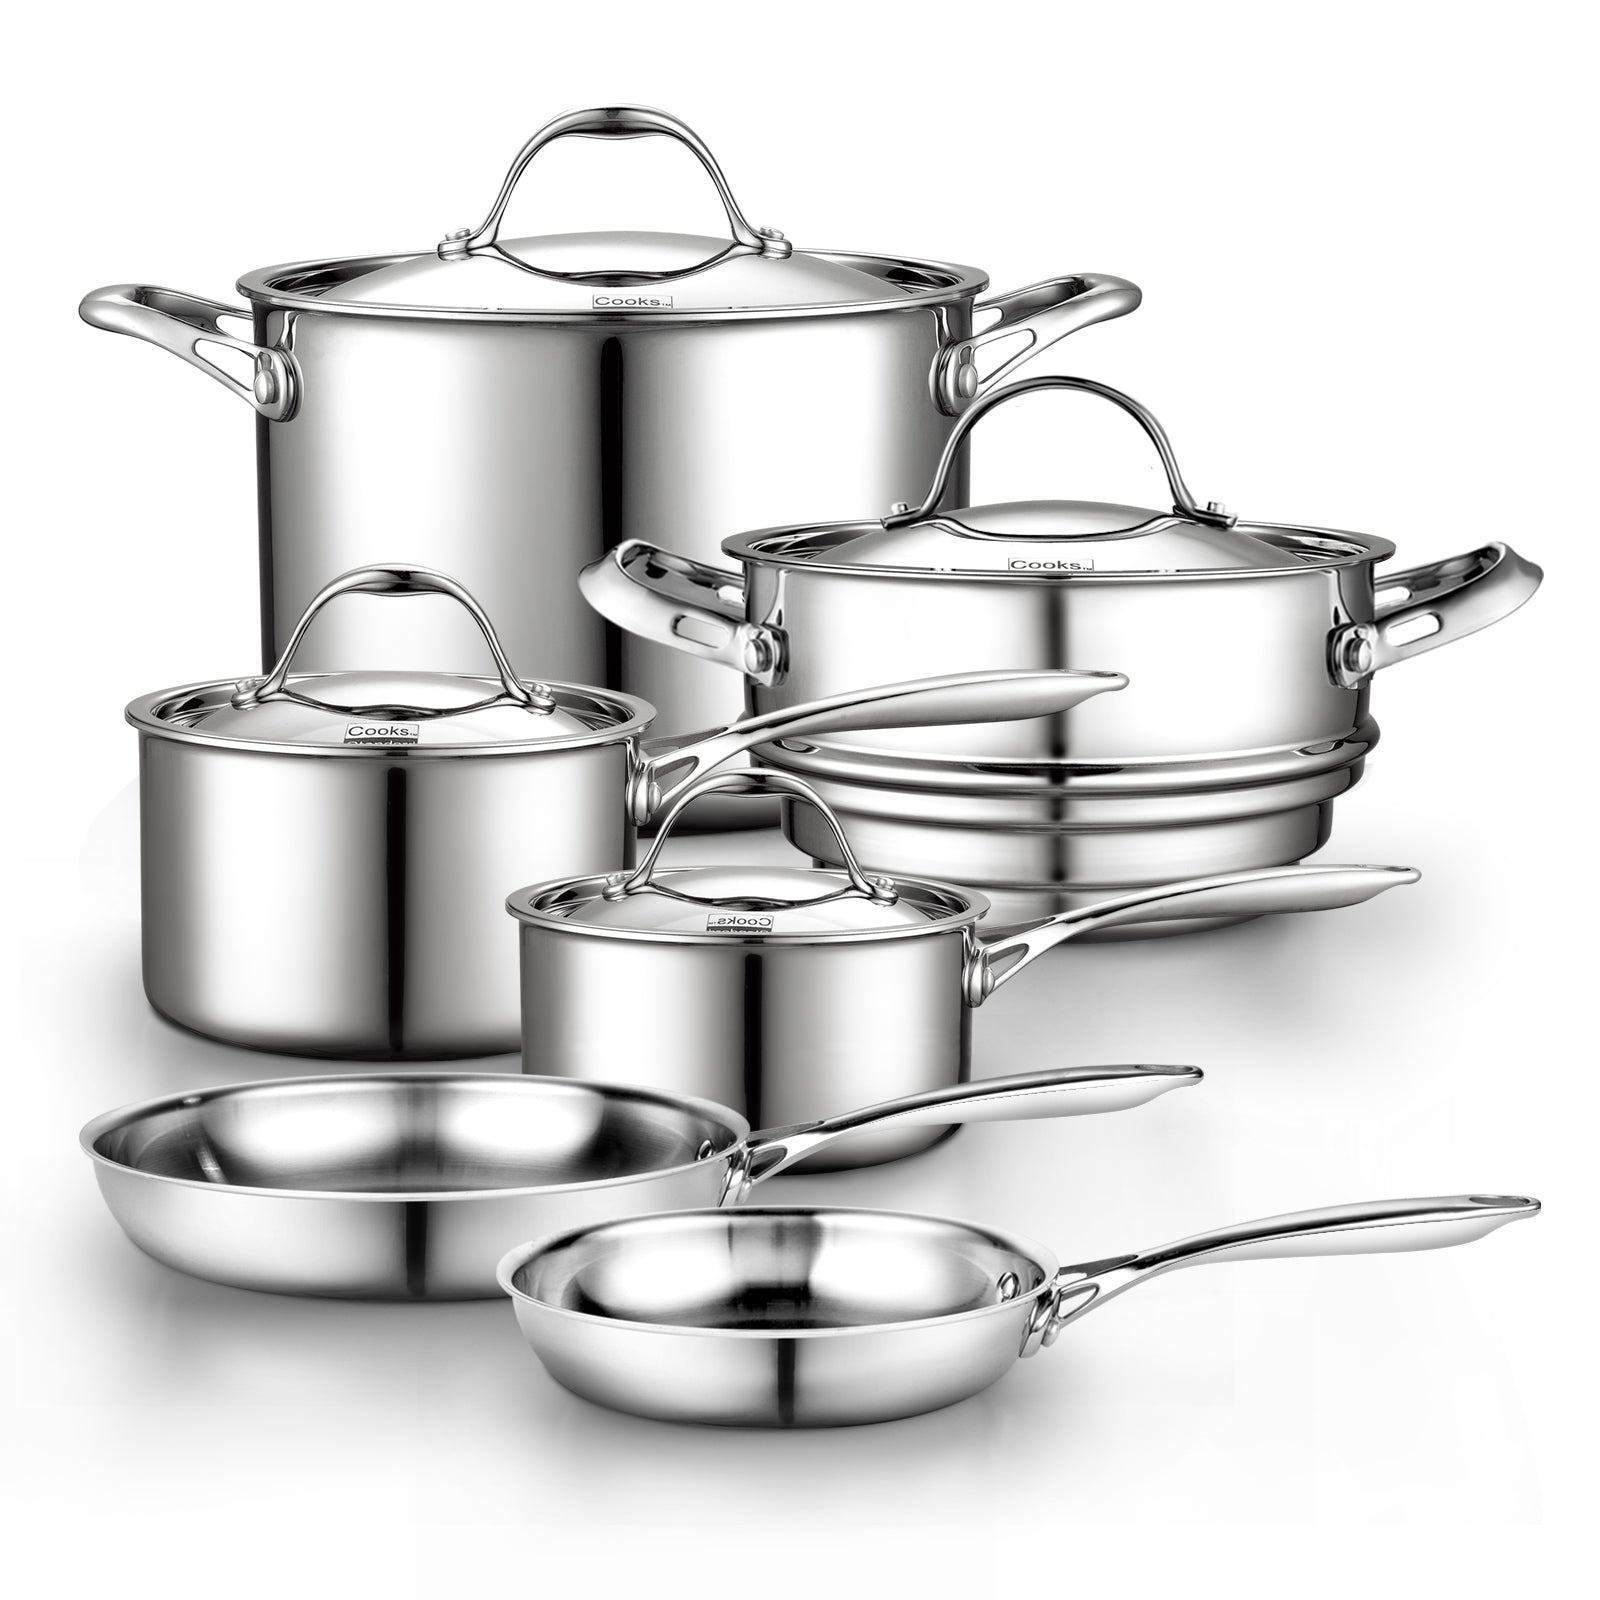 Stainless Steel Pots and Pans Set, 7-Piece Kitchen Cookware Sets with Glass  Lids, Stay-Cool Handle, Oven Safe, Works with Induction/Electric and Gas